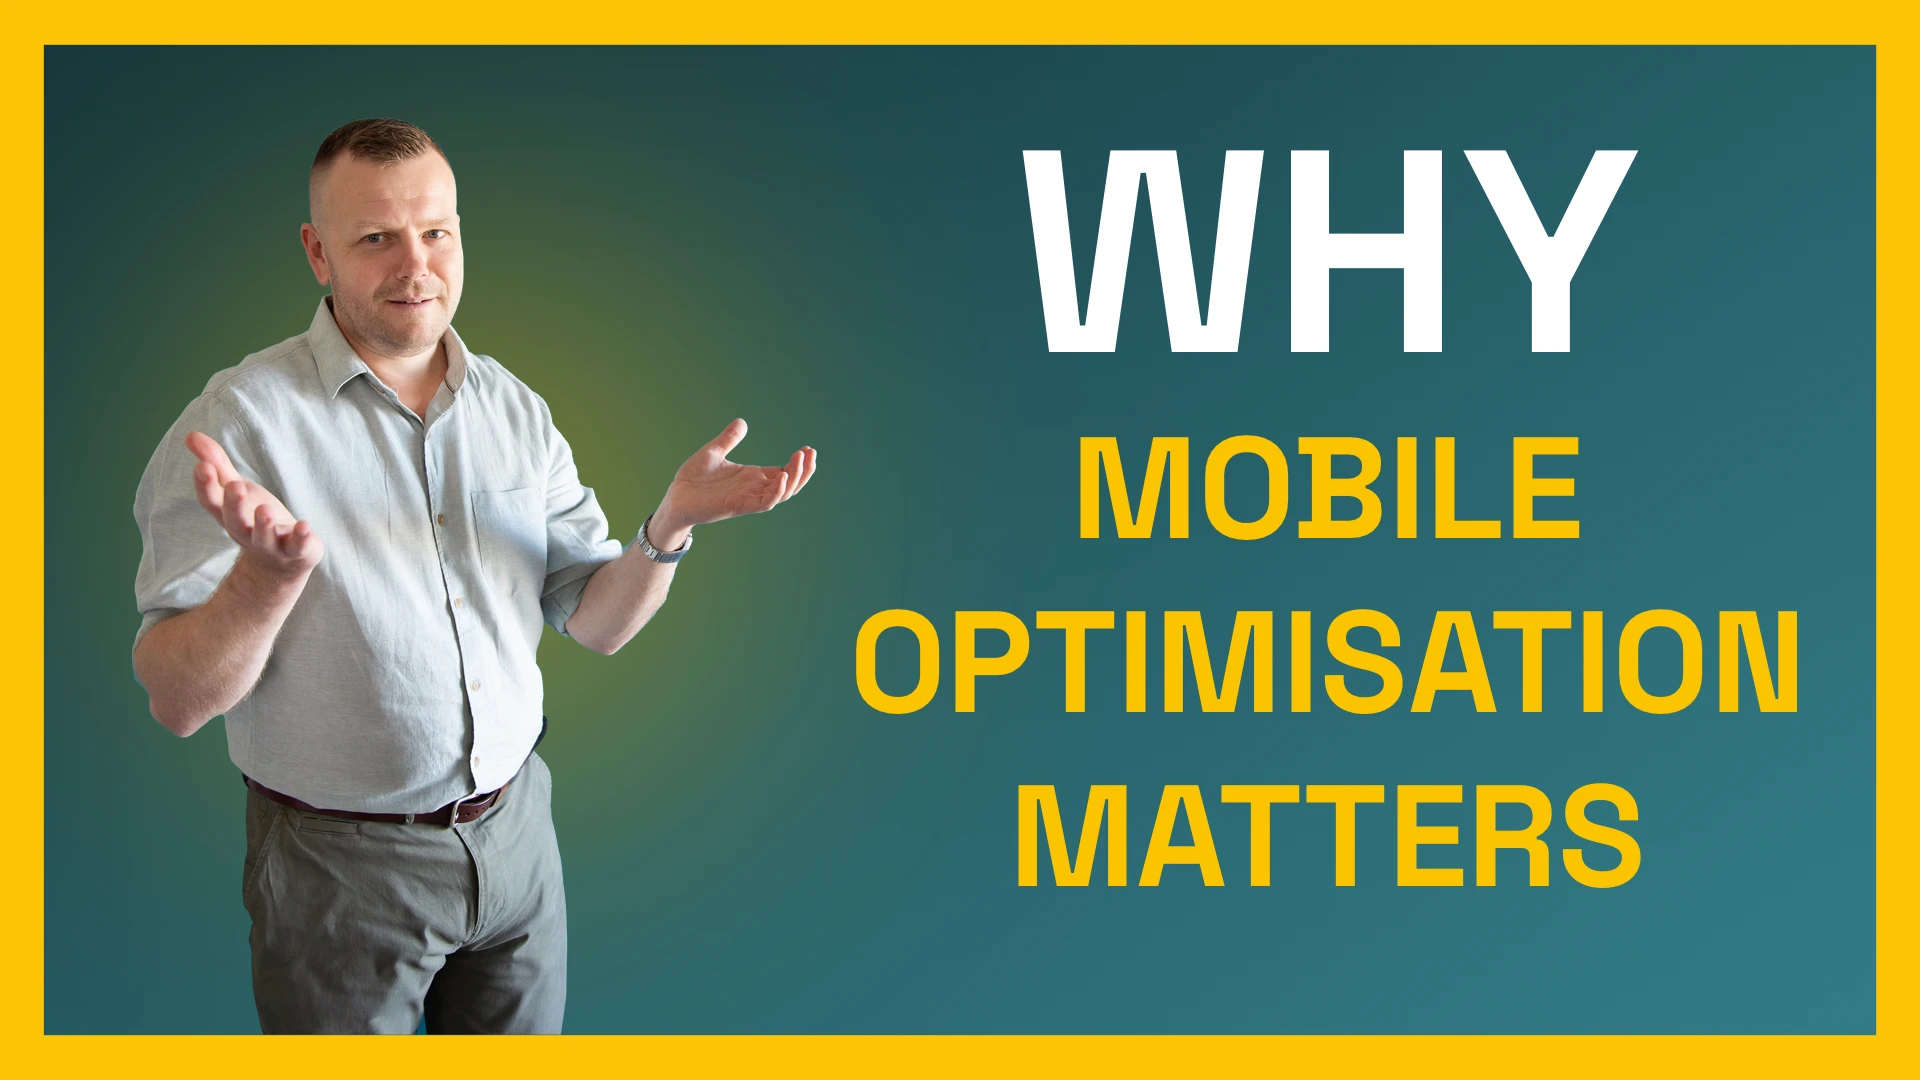 Why mobile optimization matters for website.